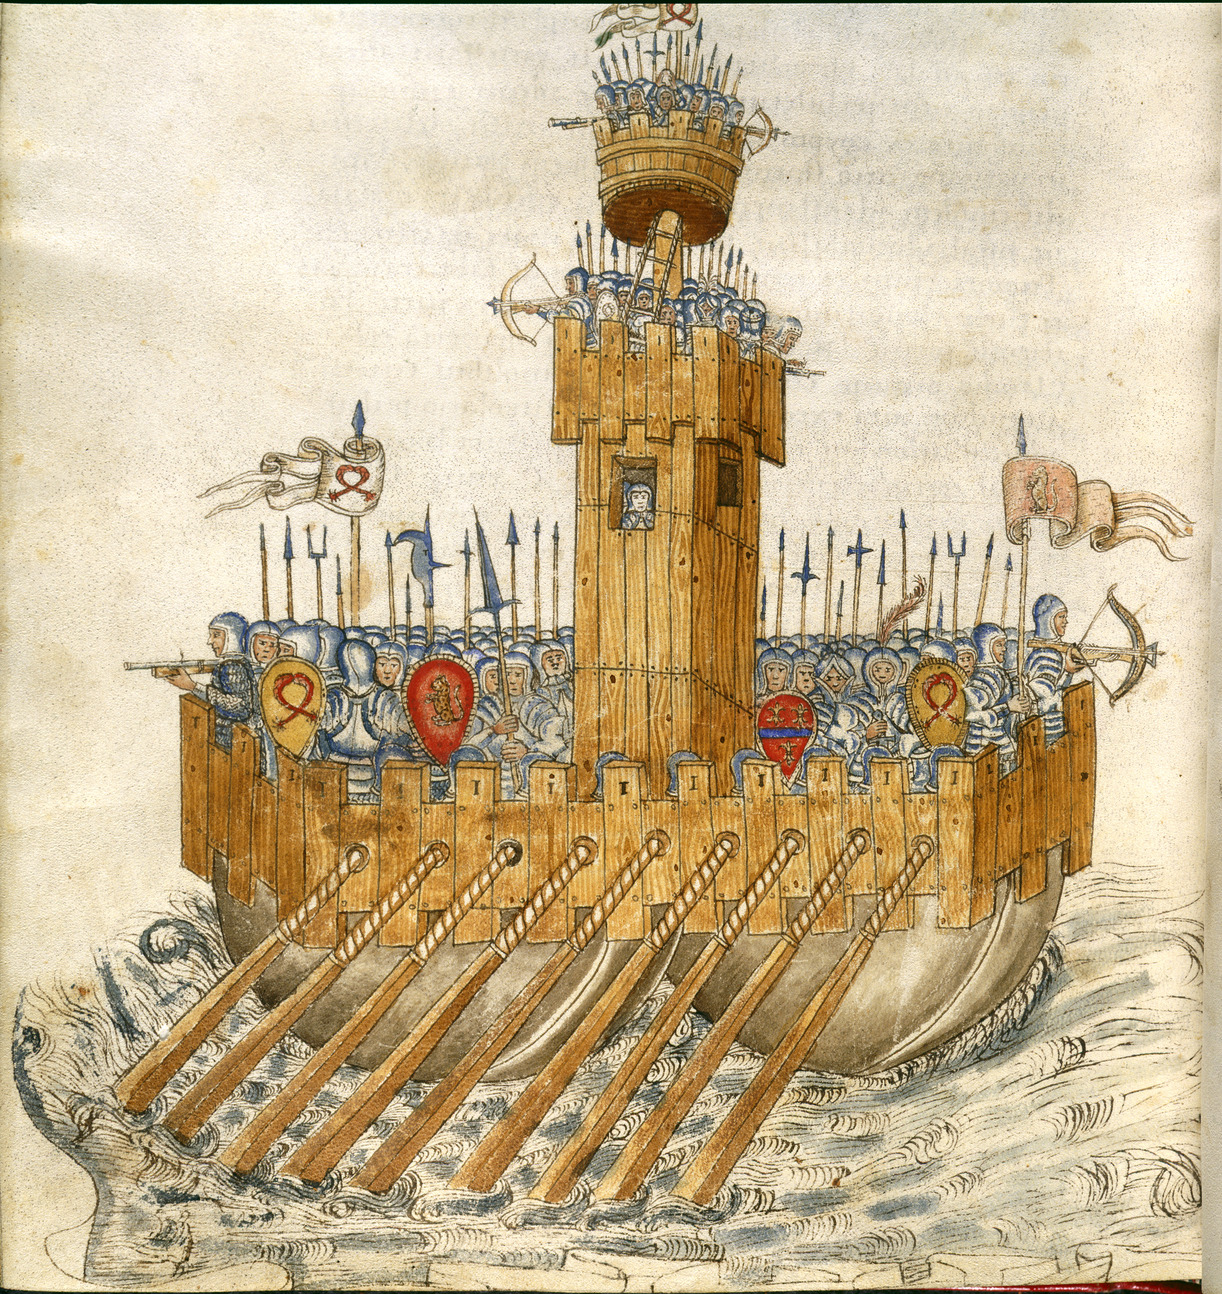 Ship with armed soldiers   De re militari (15th C), f.231v   BL Add MS 24945